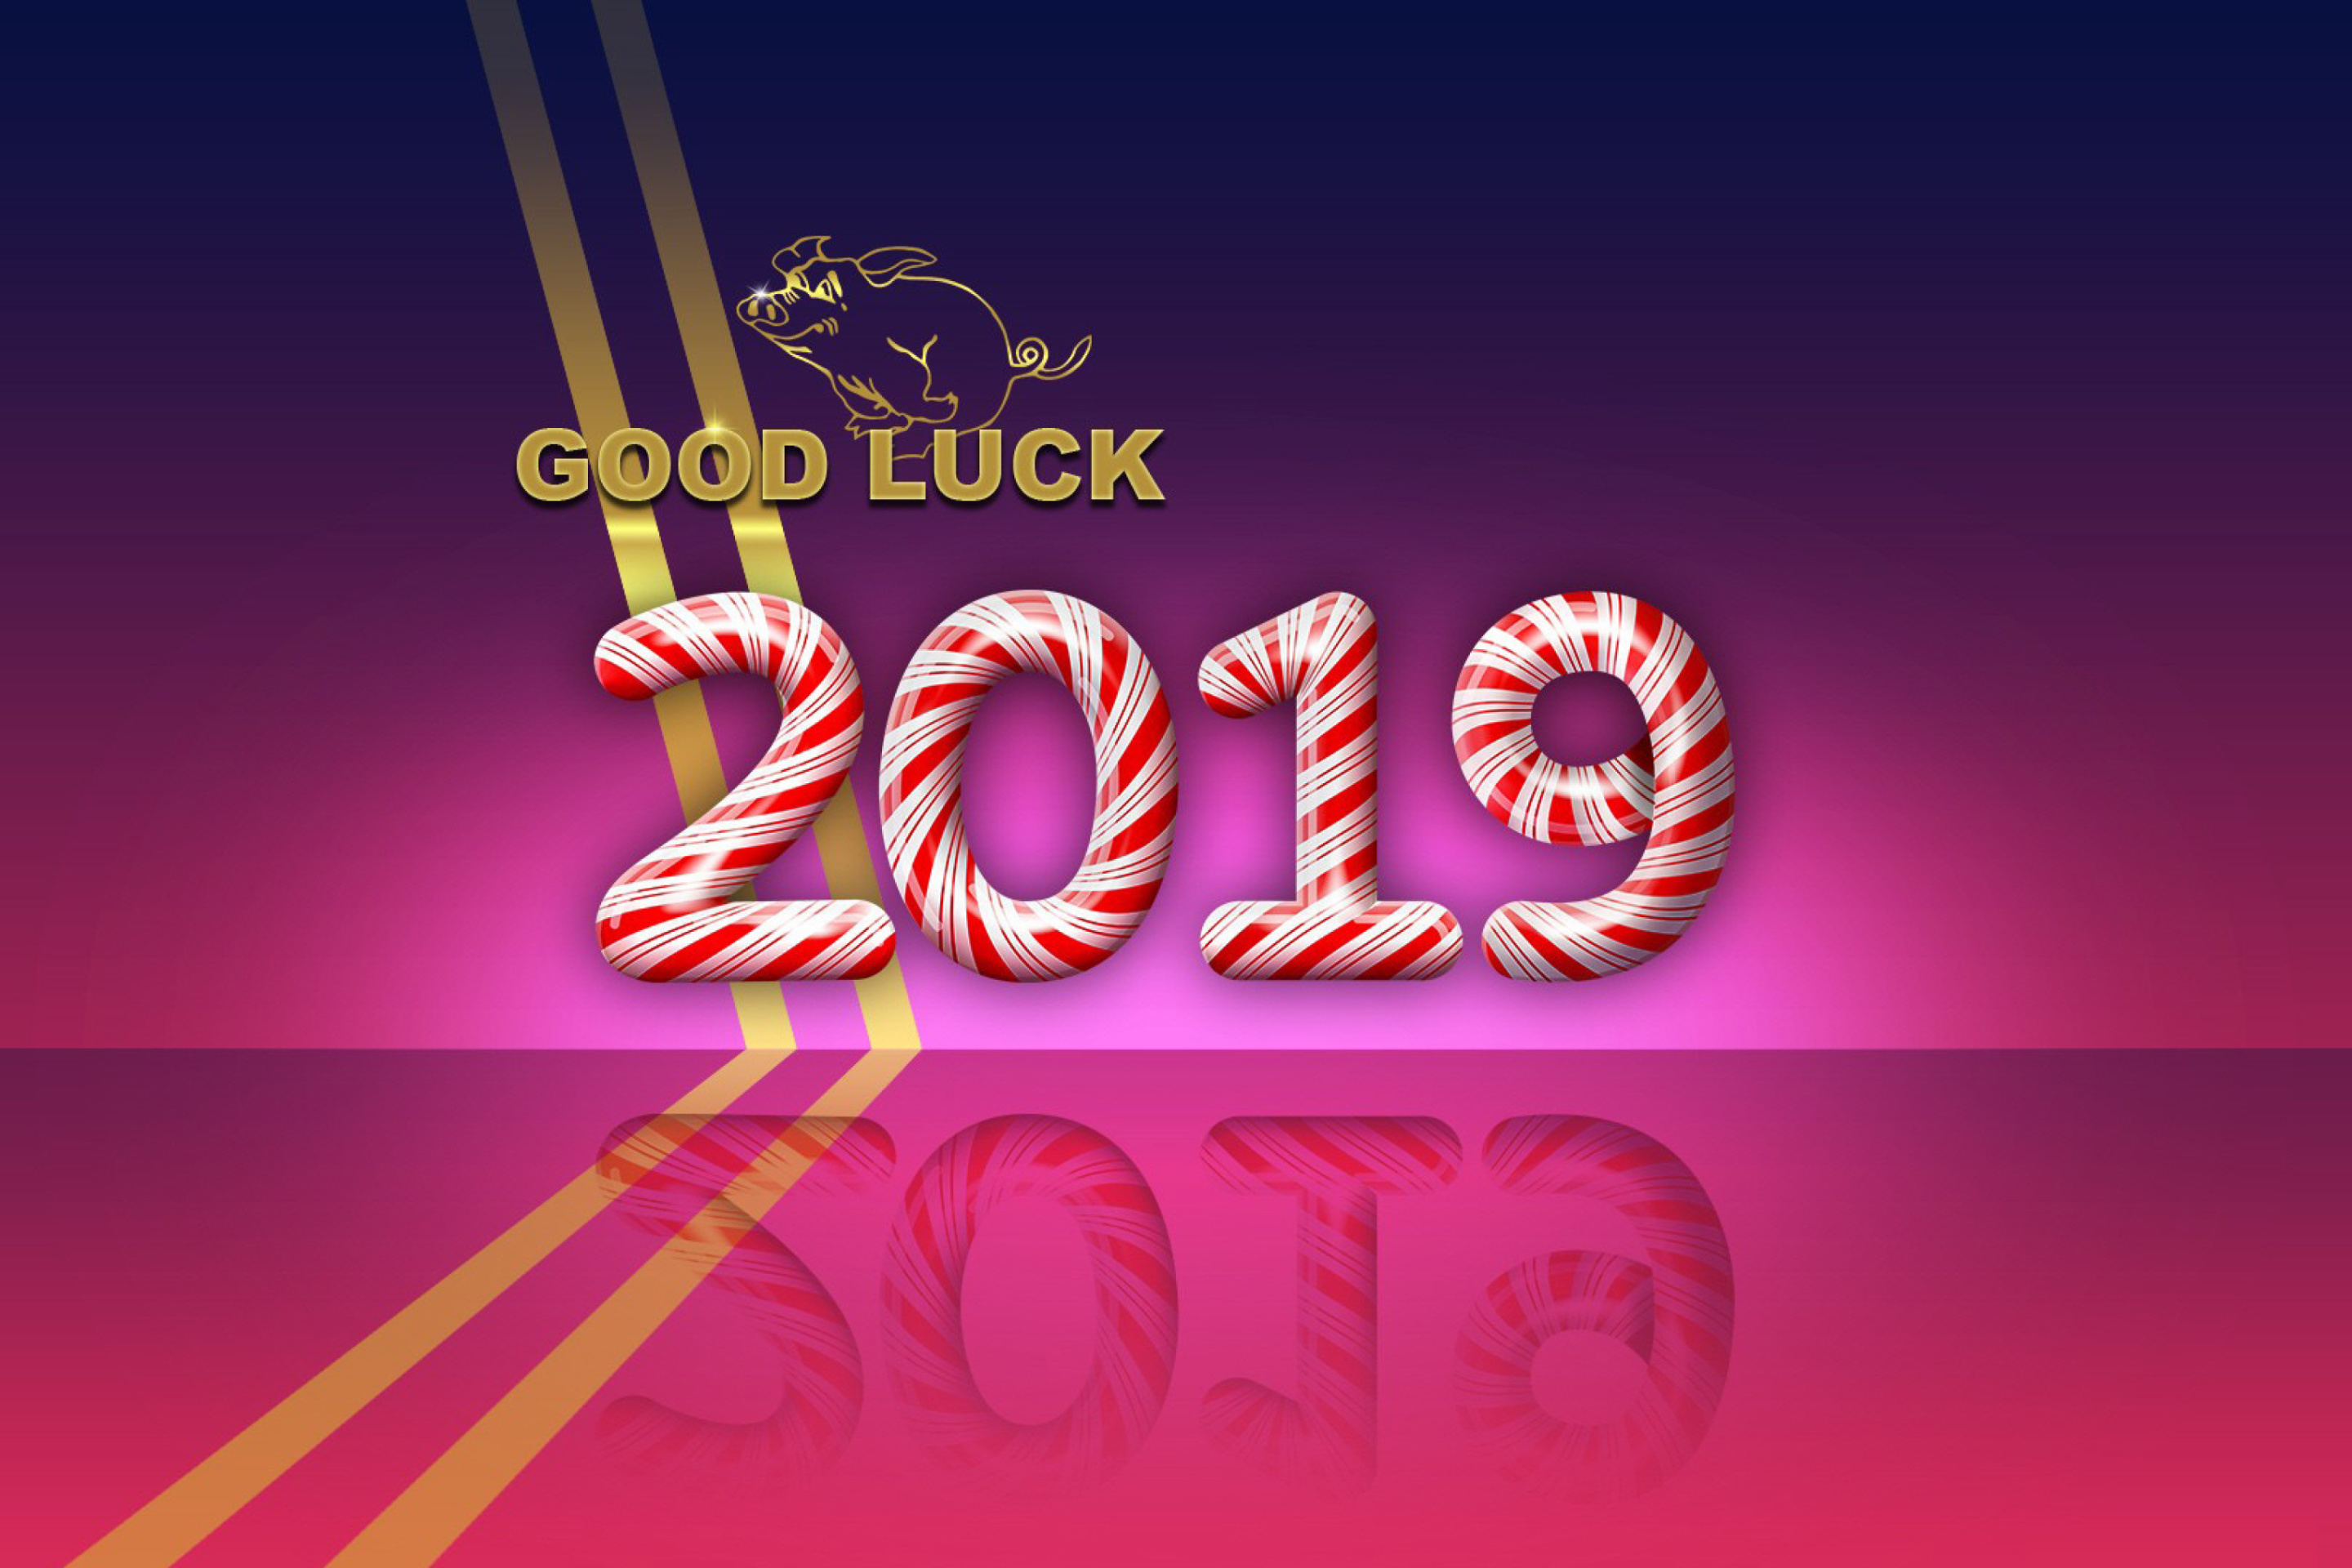 Good Luck in New Year 2019 wallpaper 2880x1920